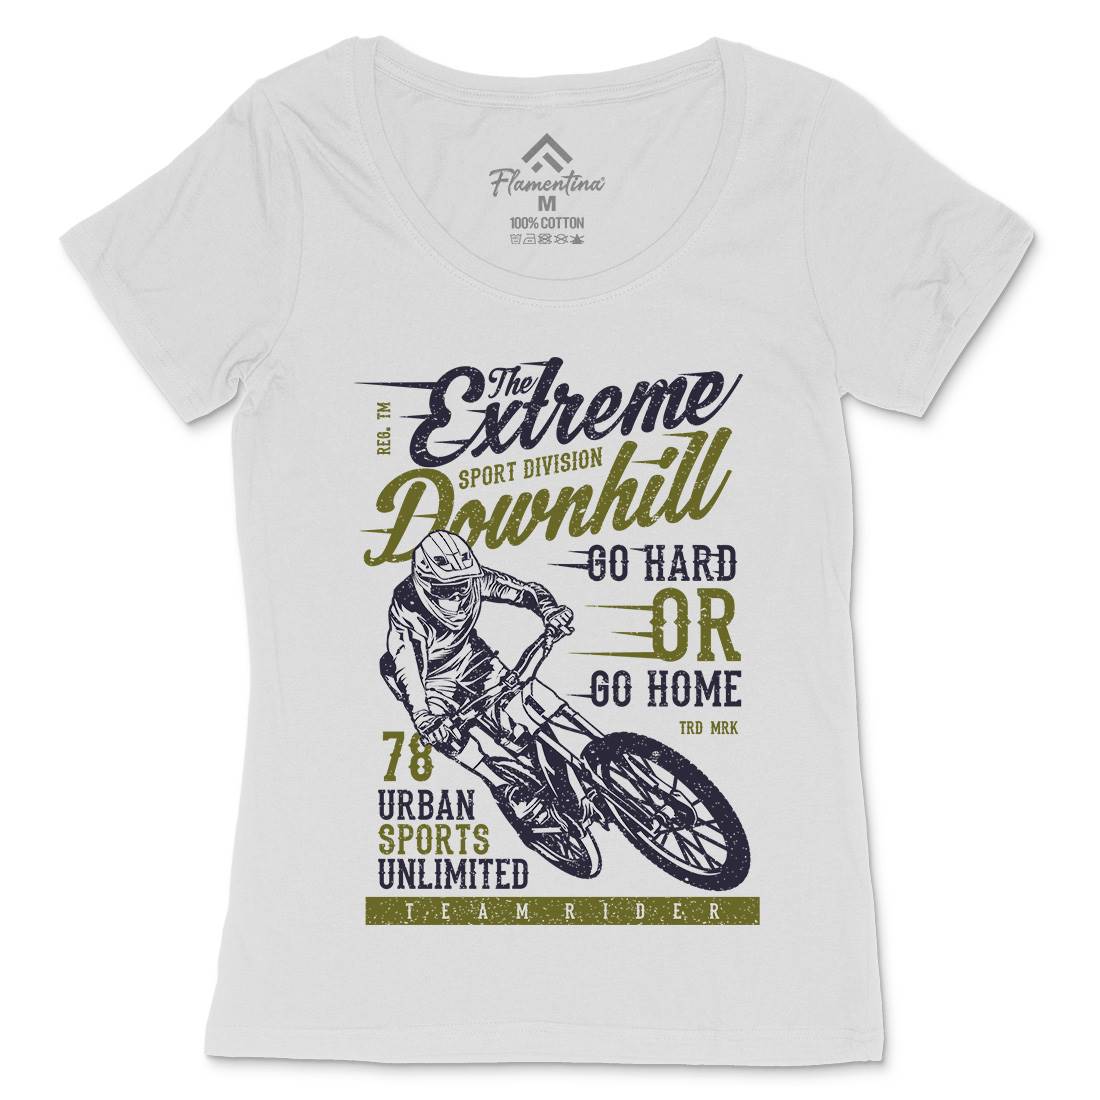 Extreme Downhill Womens Scoop Neck T-Shirt Bikes A772